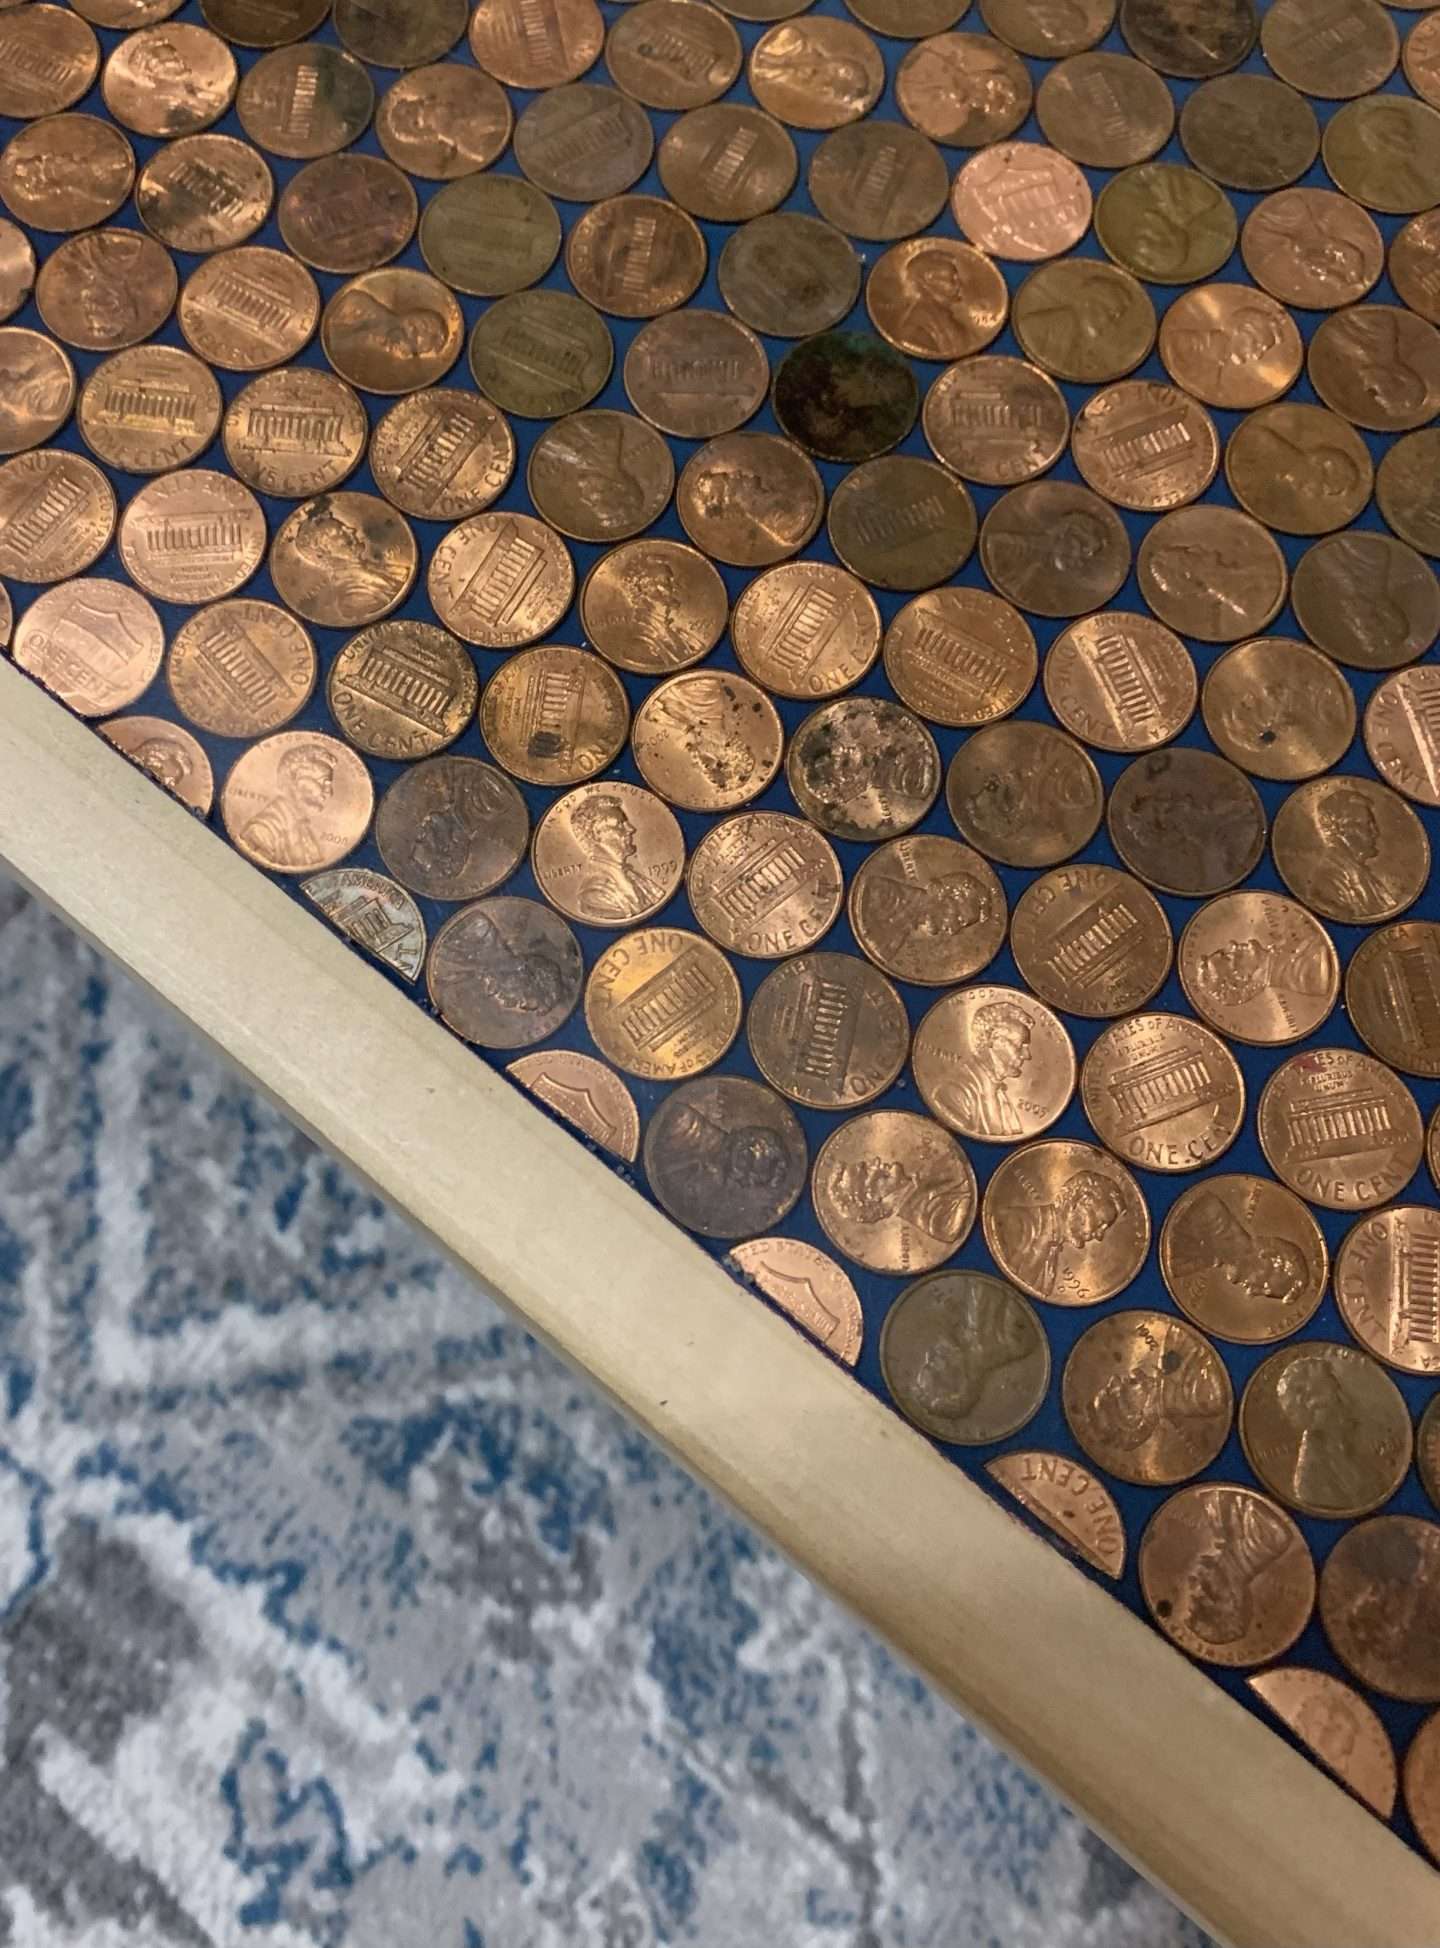 We cut pennies with tin snips to fit in the edges of the penny coffee table.